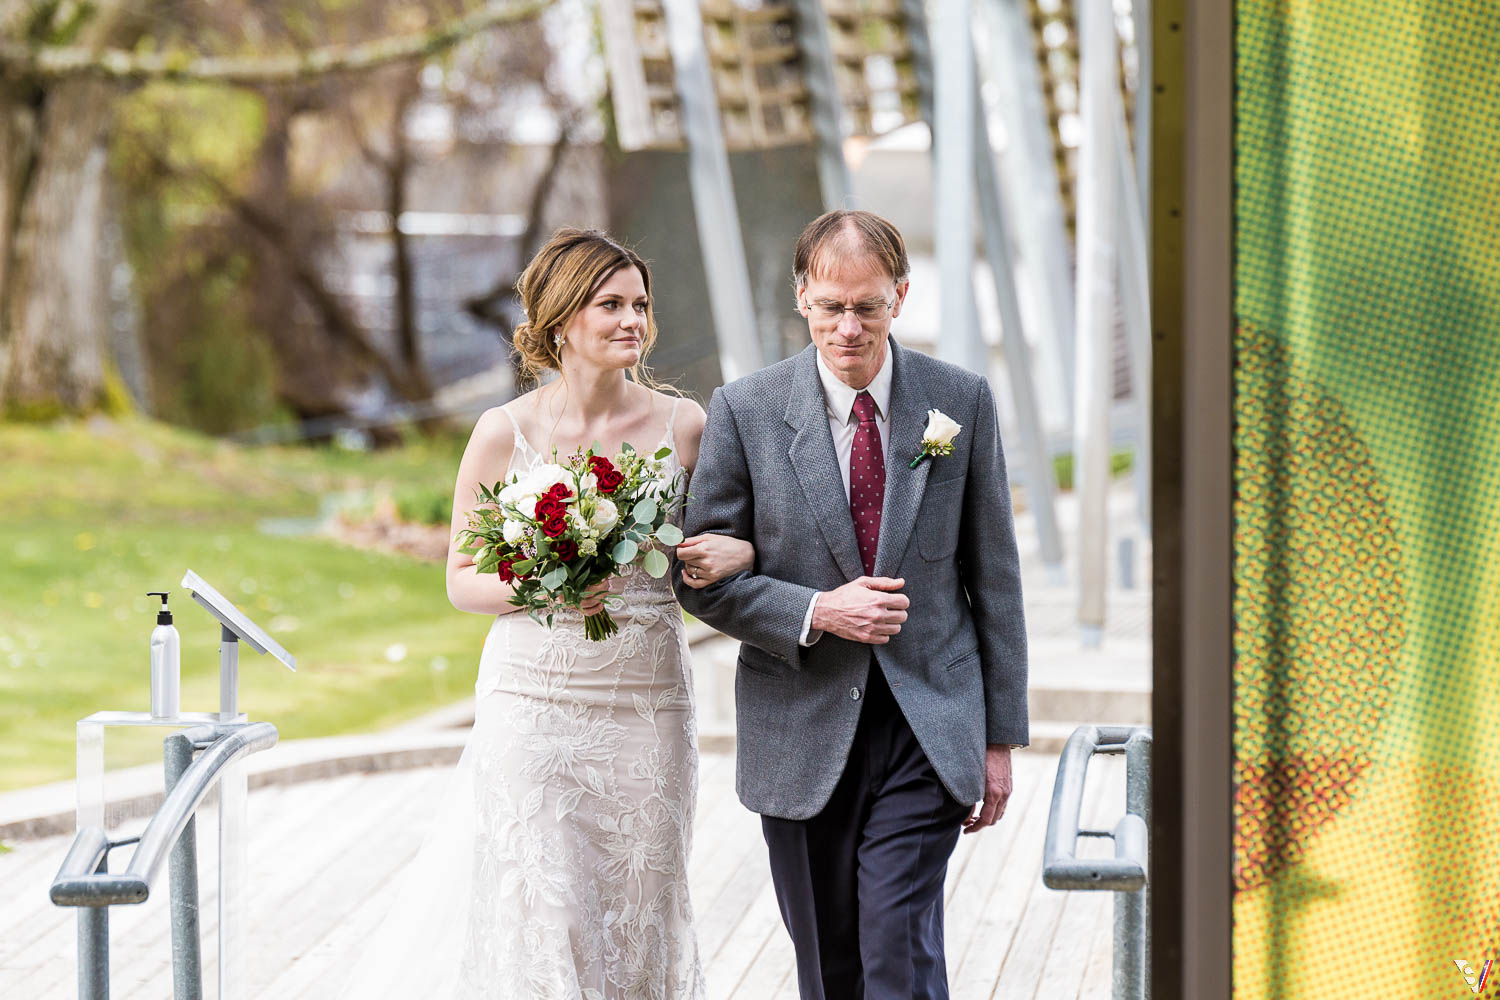 the bride arrives with her father at the Pavilion QE park.